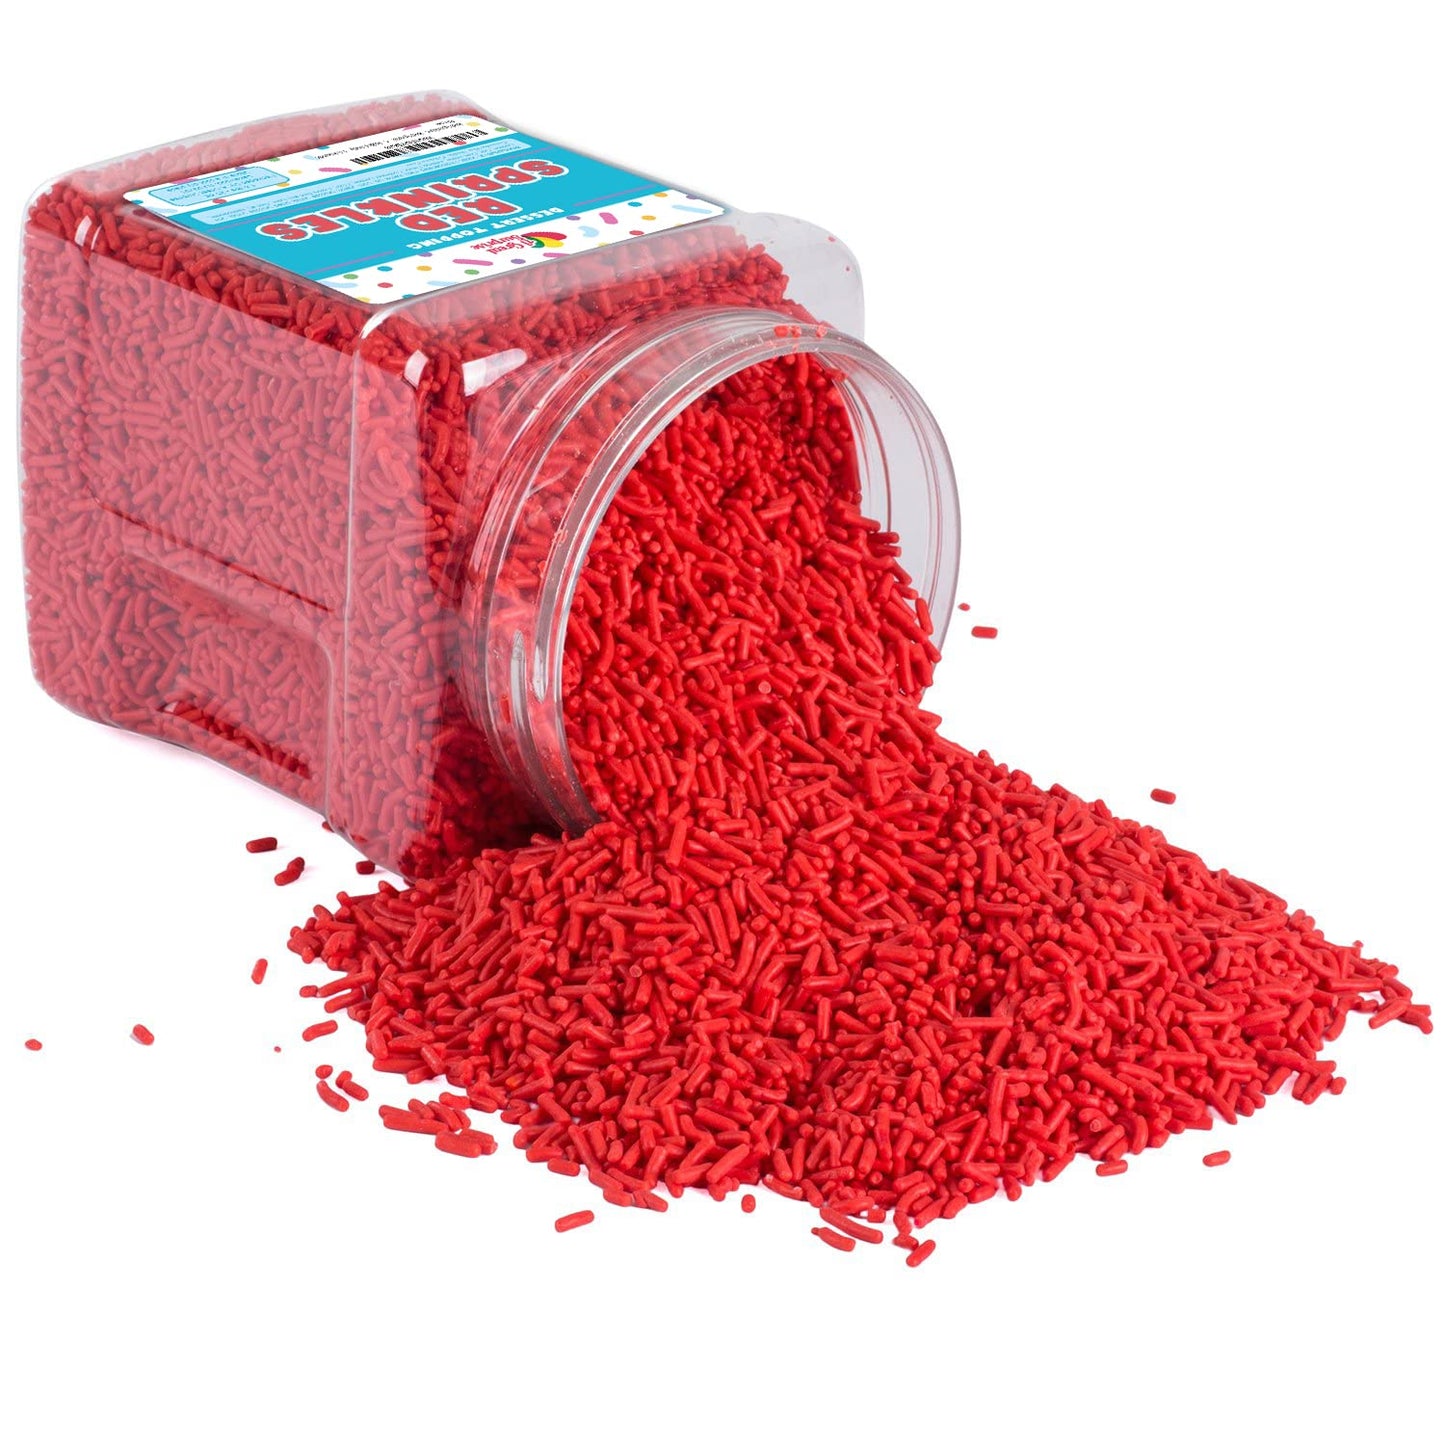 Red Sprinkles - Red Jimmies for Cookie Decorating - Red Sprinkles Bulk in Resealable Container - Red Sprinkles Jimmies - Bulk Candy - 1.6 Pounds